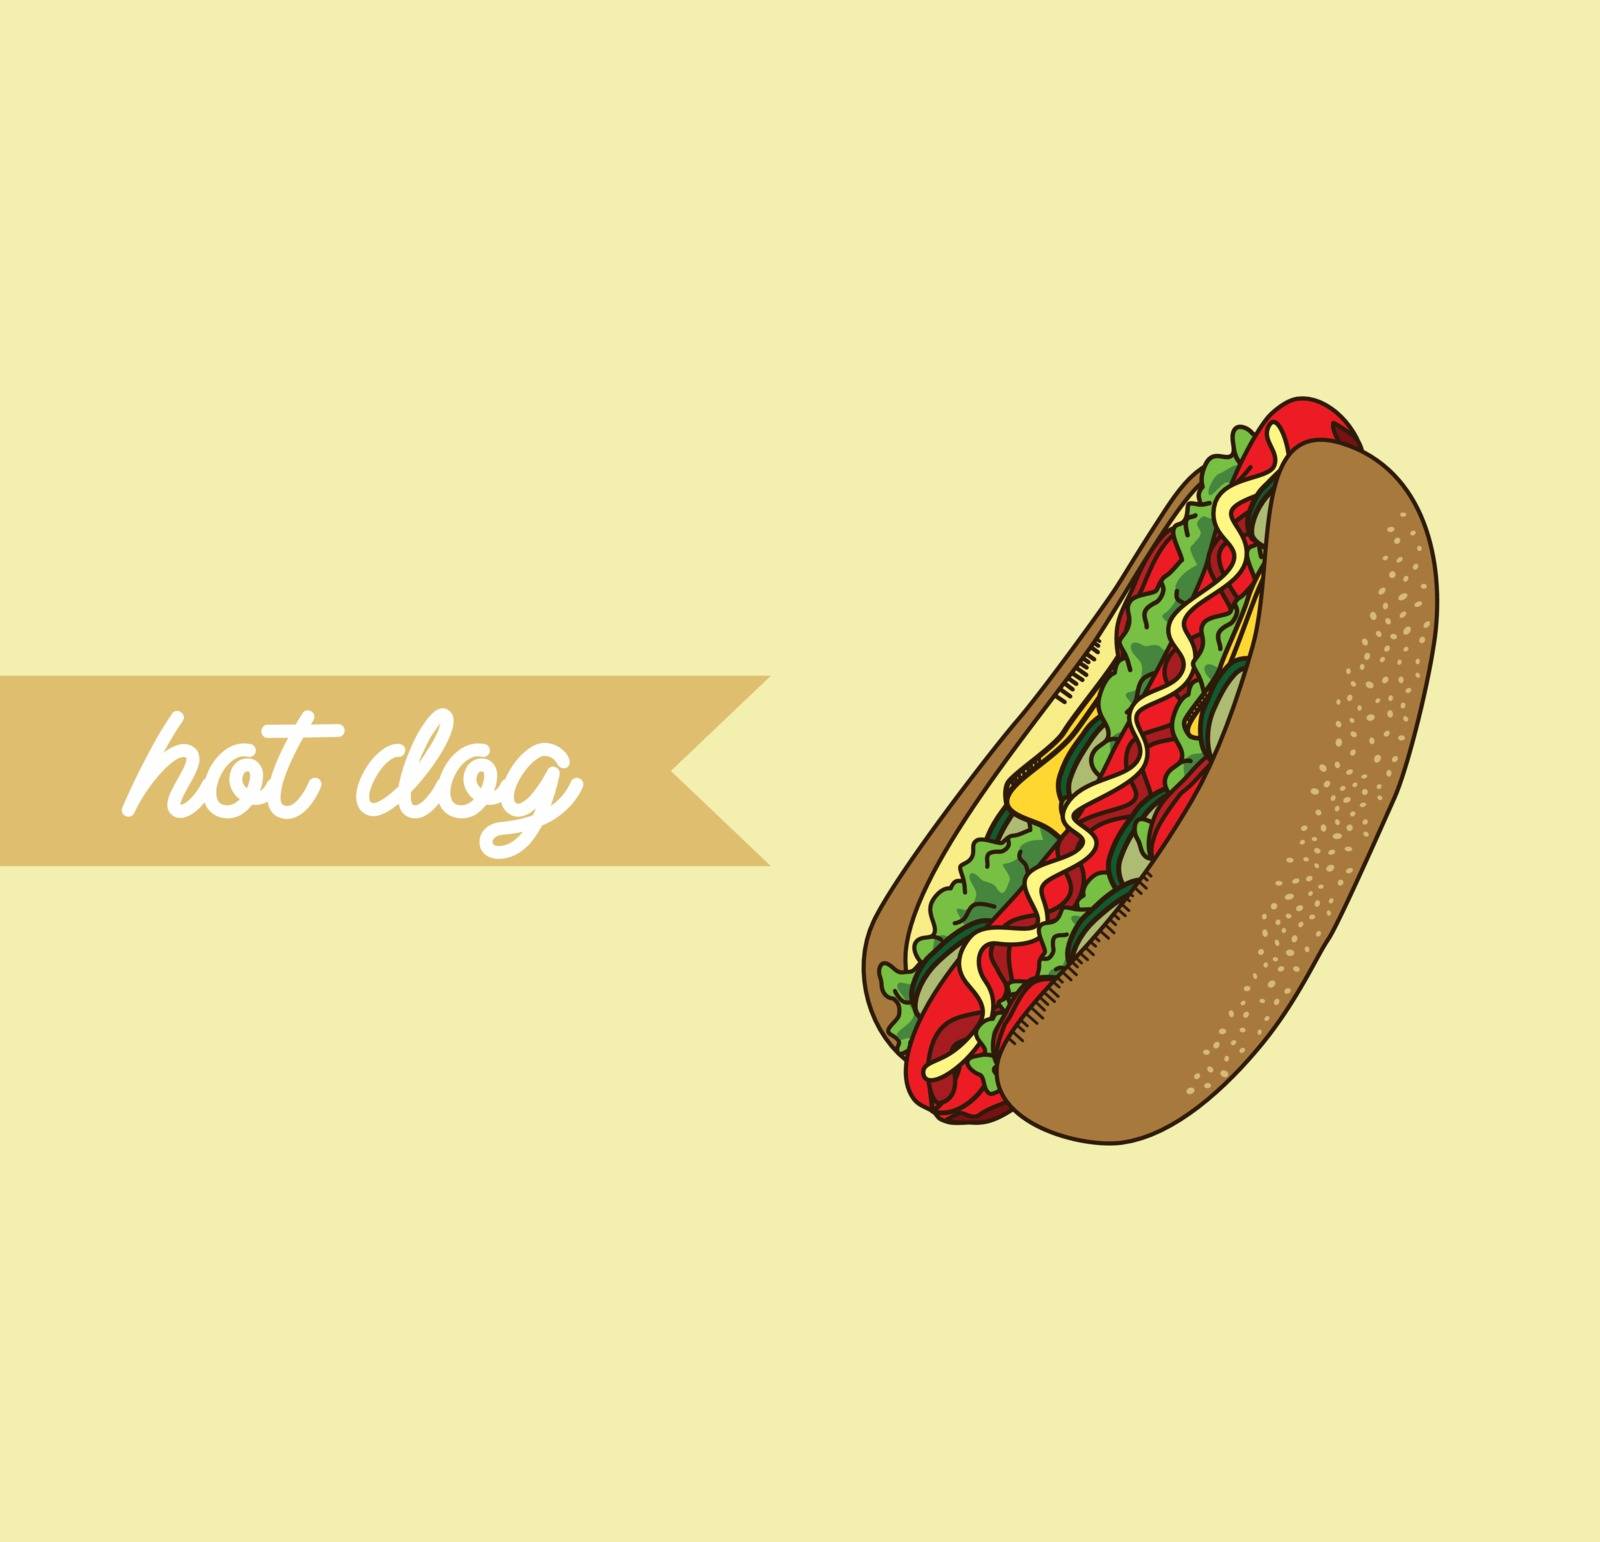 hot dog by vector1st